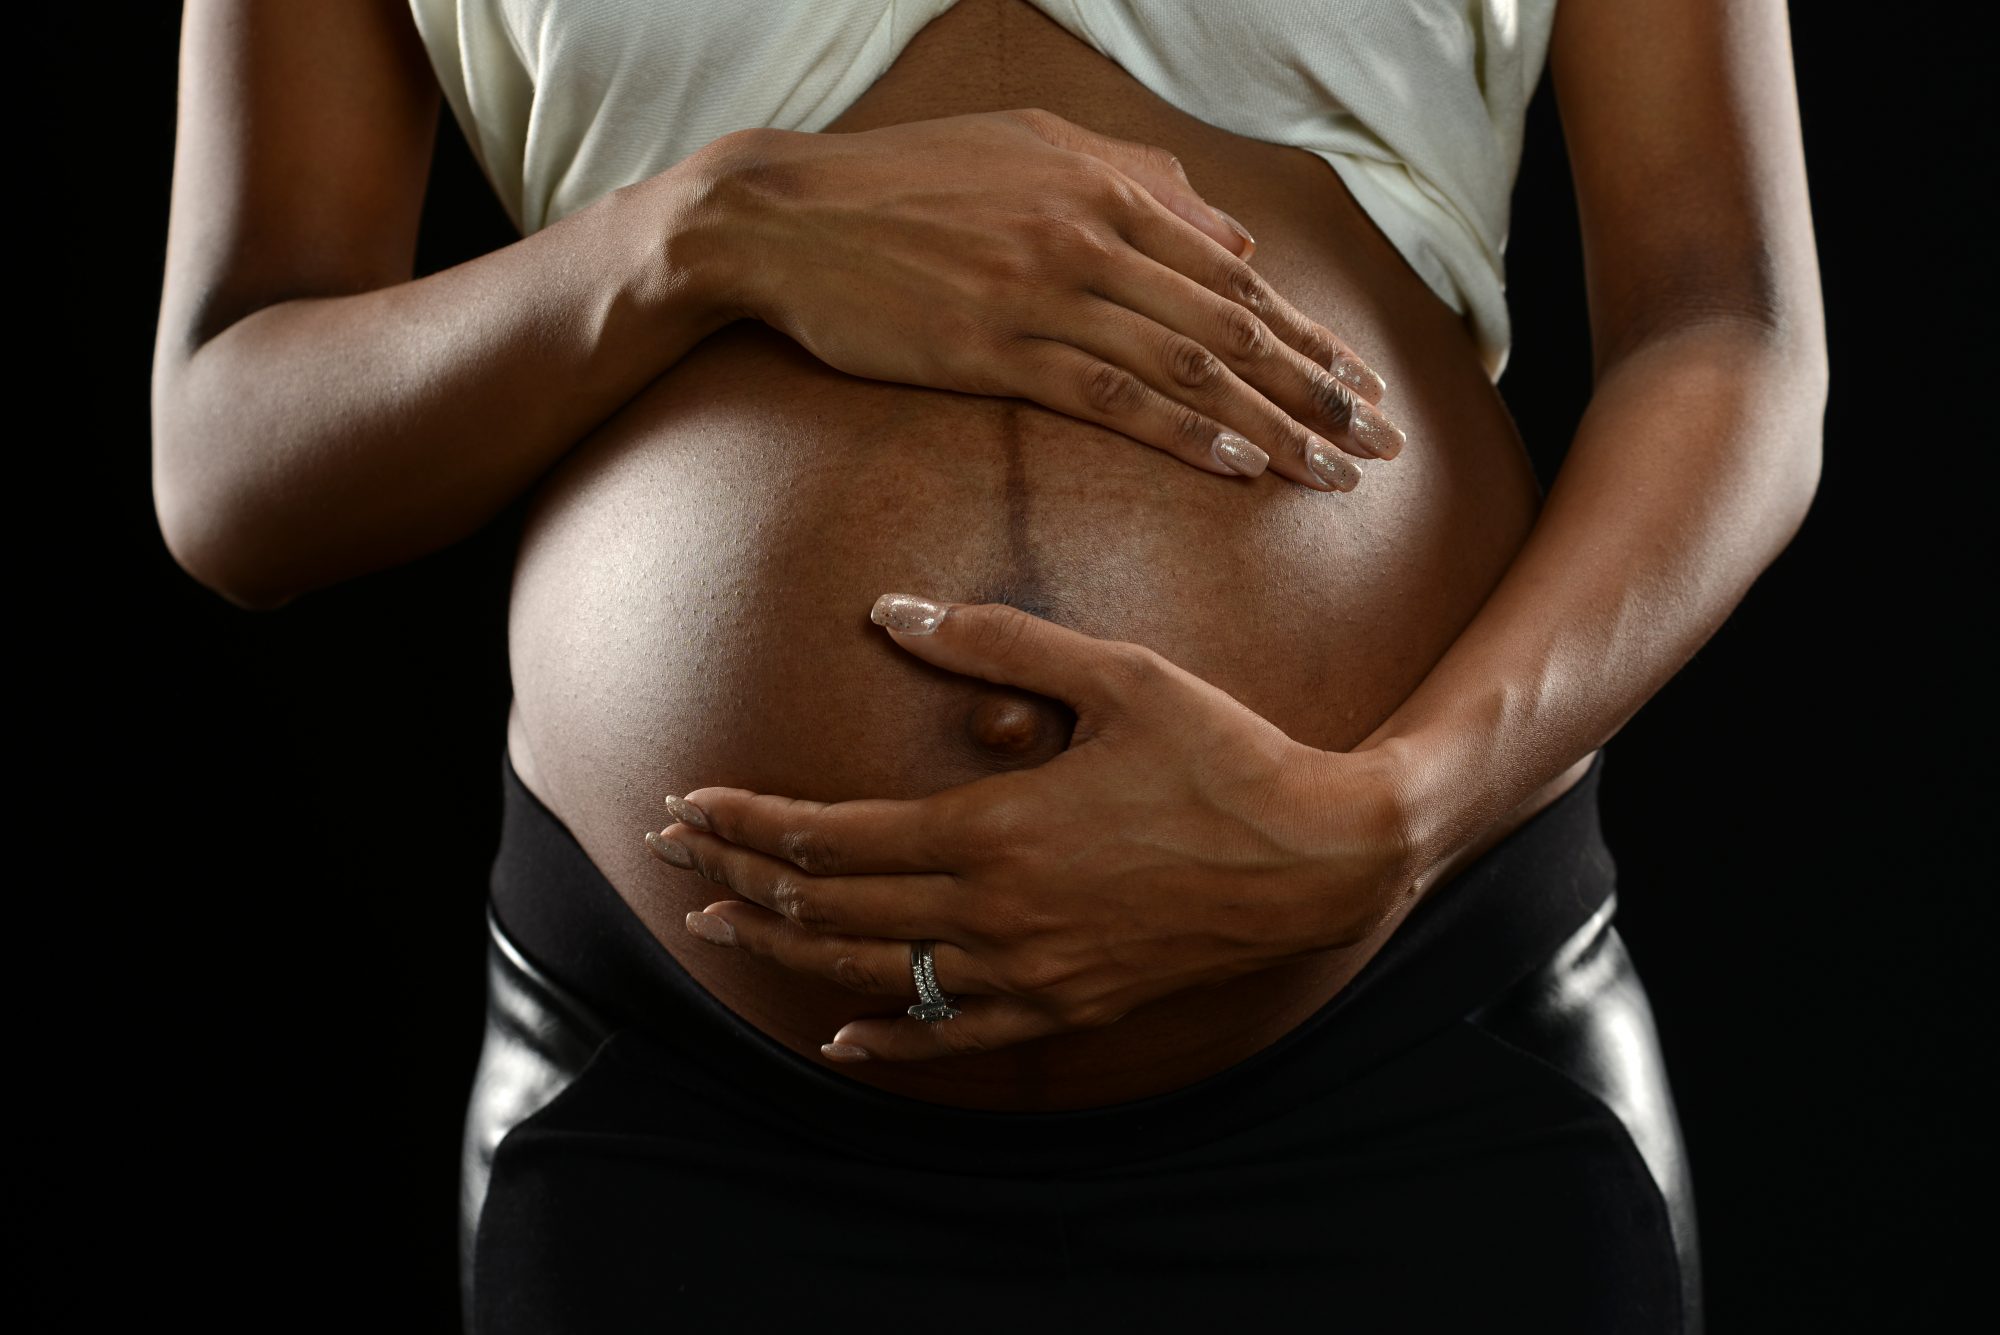 I'm Black, Pregnant, and Afraid of Dying During Birth